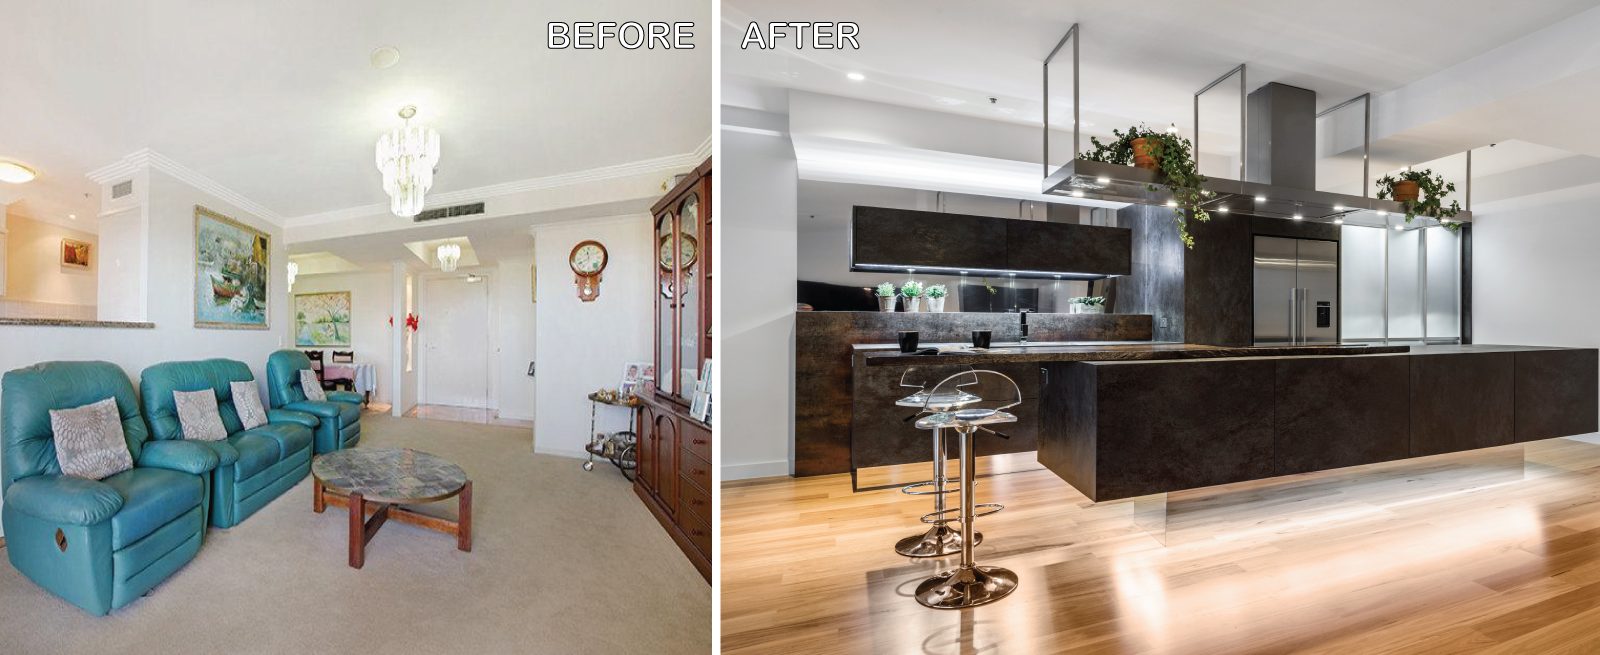 Before and After Kitchen Renovation Brisbane